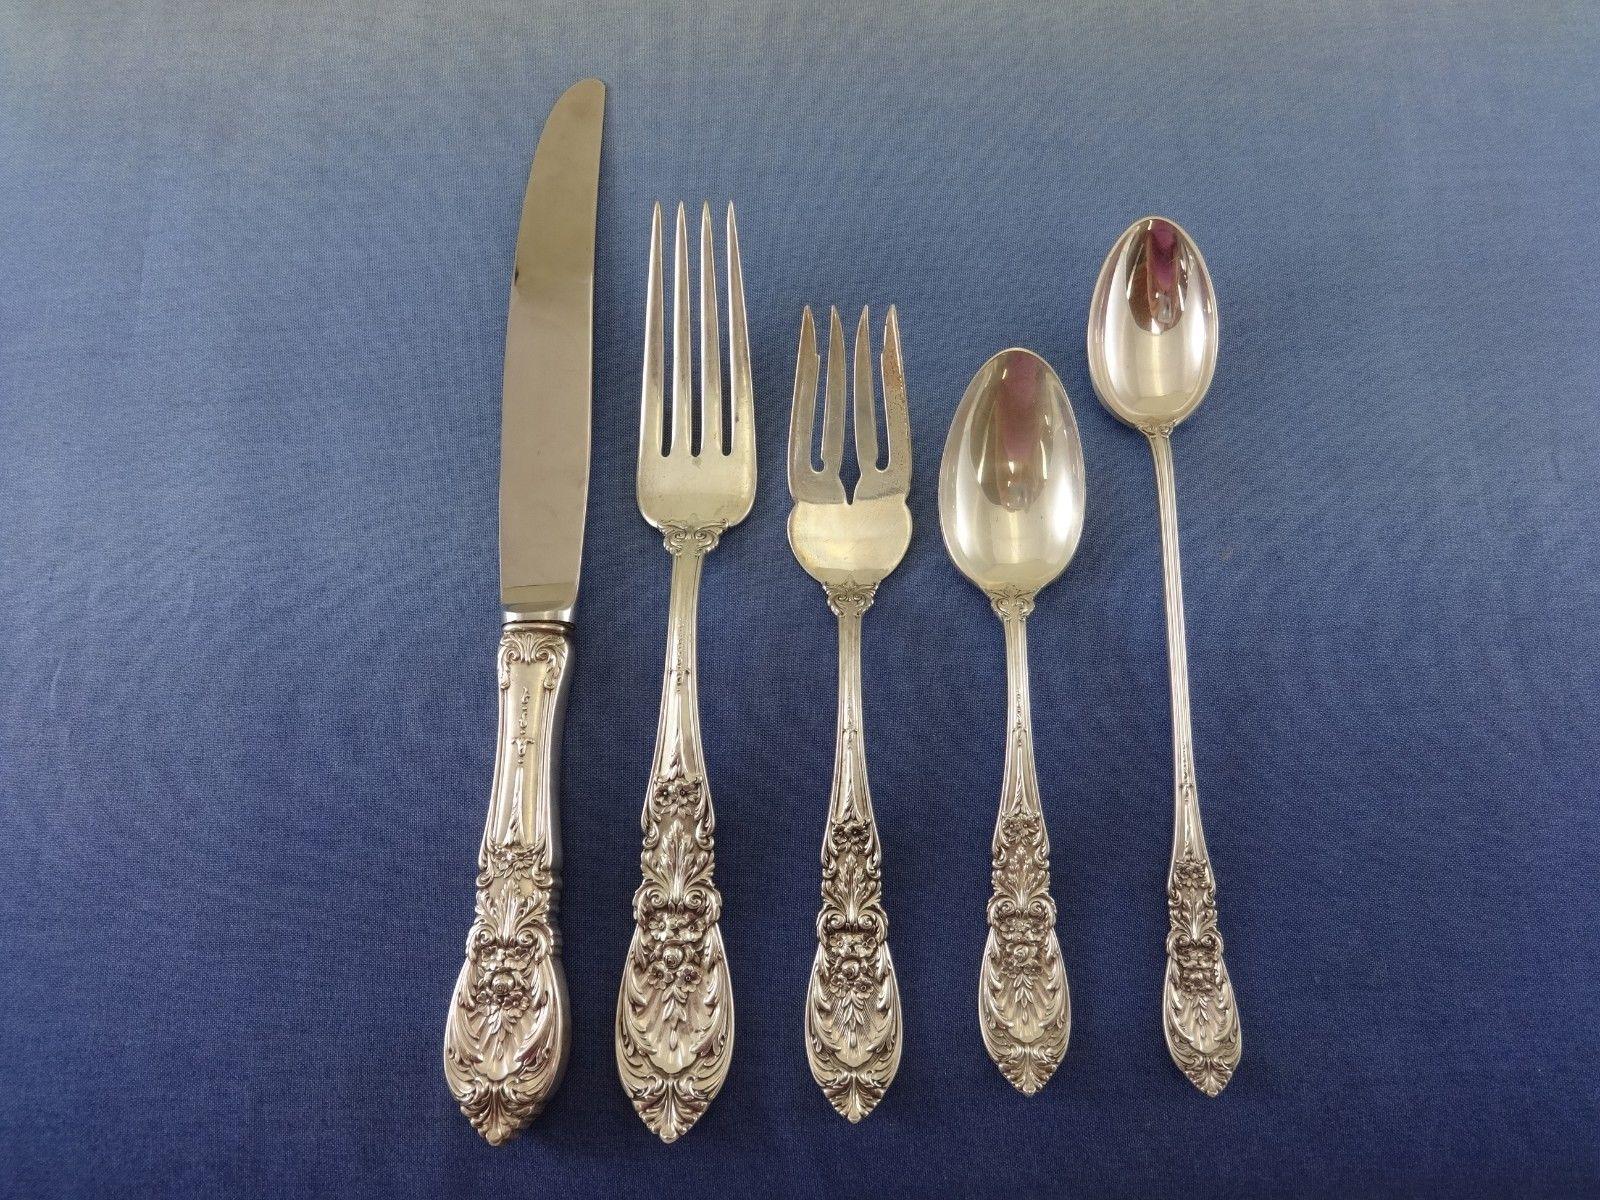 Stunning Richelieu by International sterling silver dinner size flatware set of 45 pieces. This set includes:

8 dinner size knives, 9 5/8